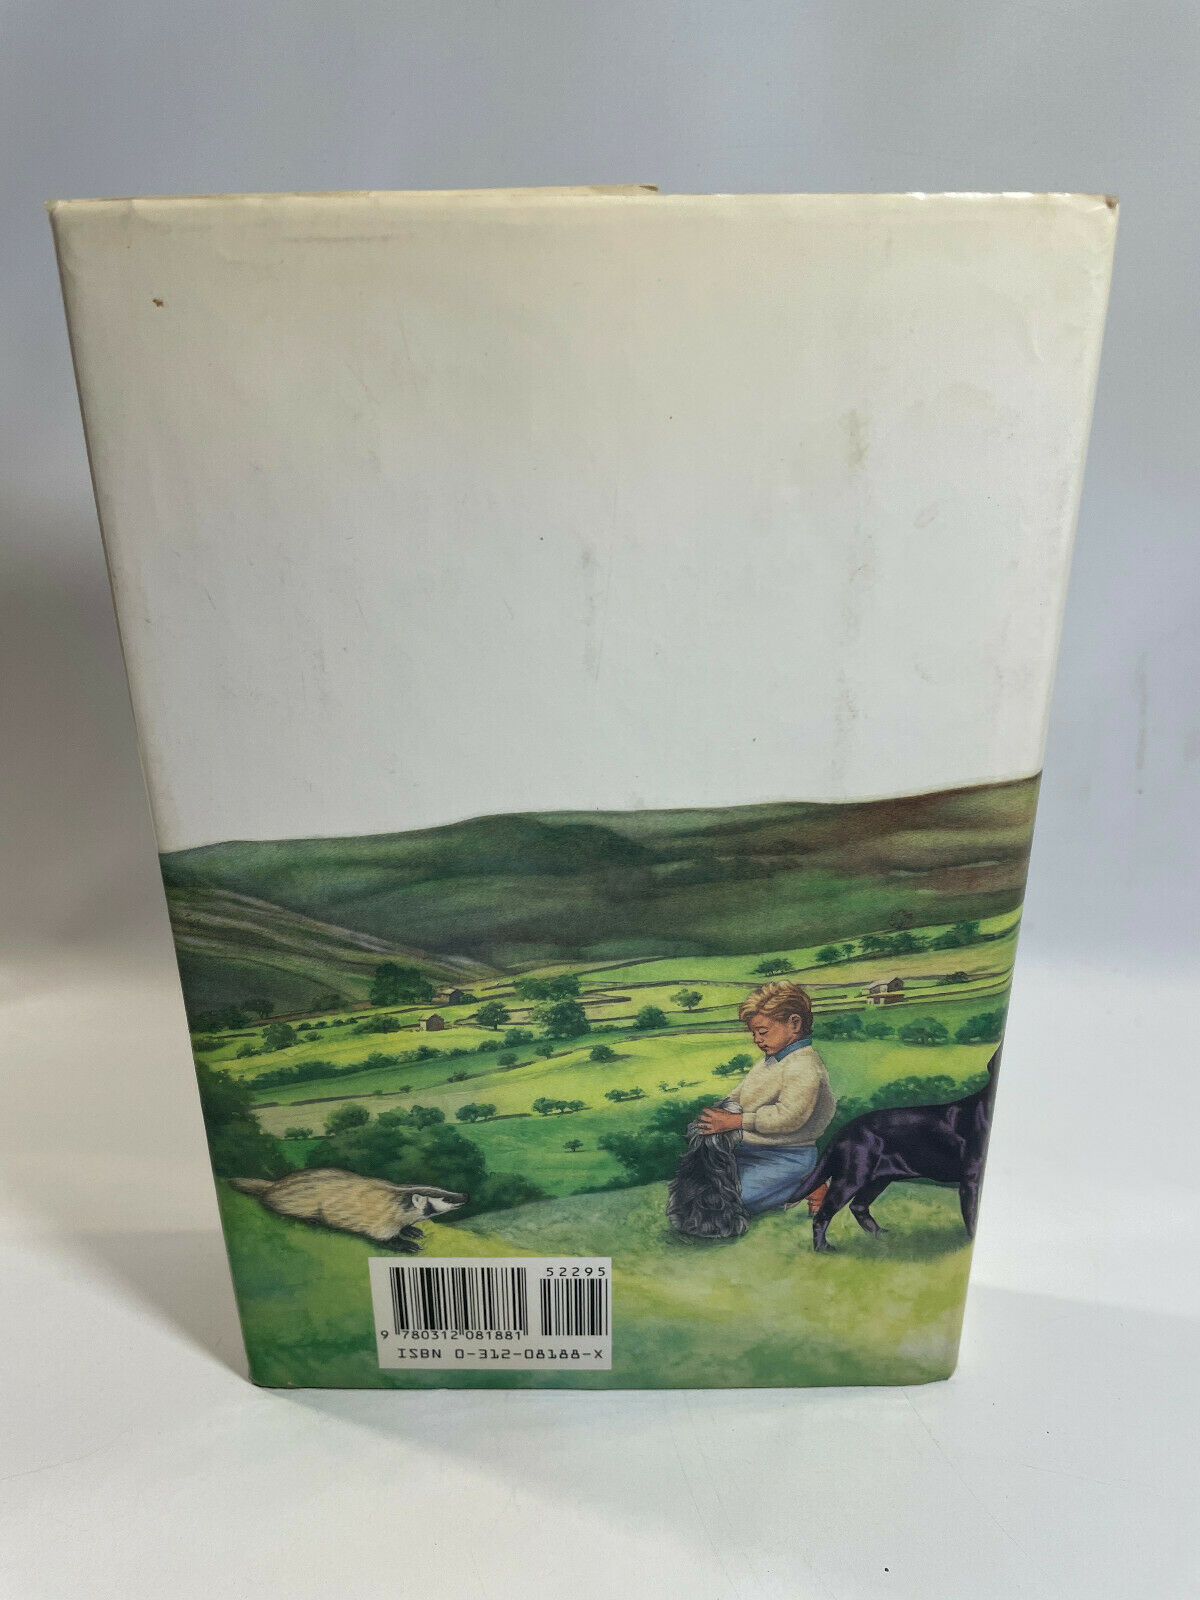 Every Living Thing by James Herriot w/ Clippings